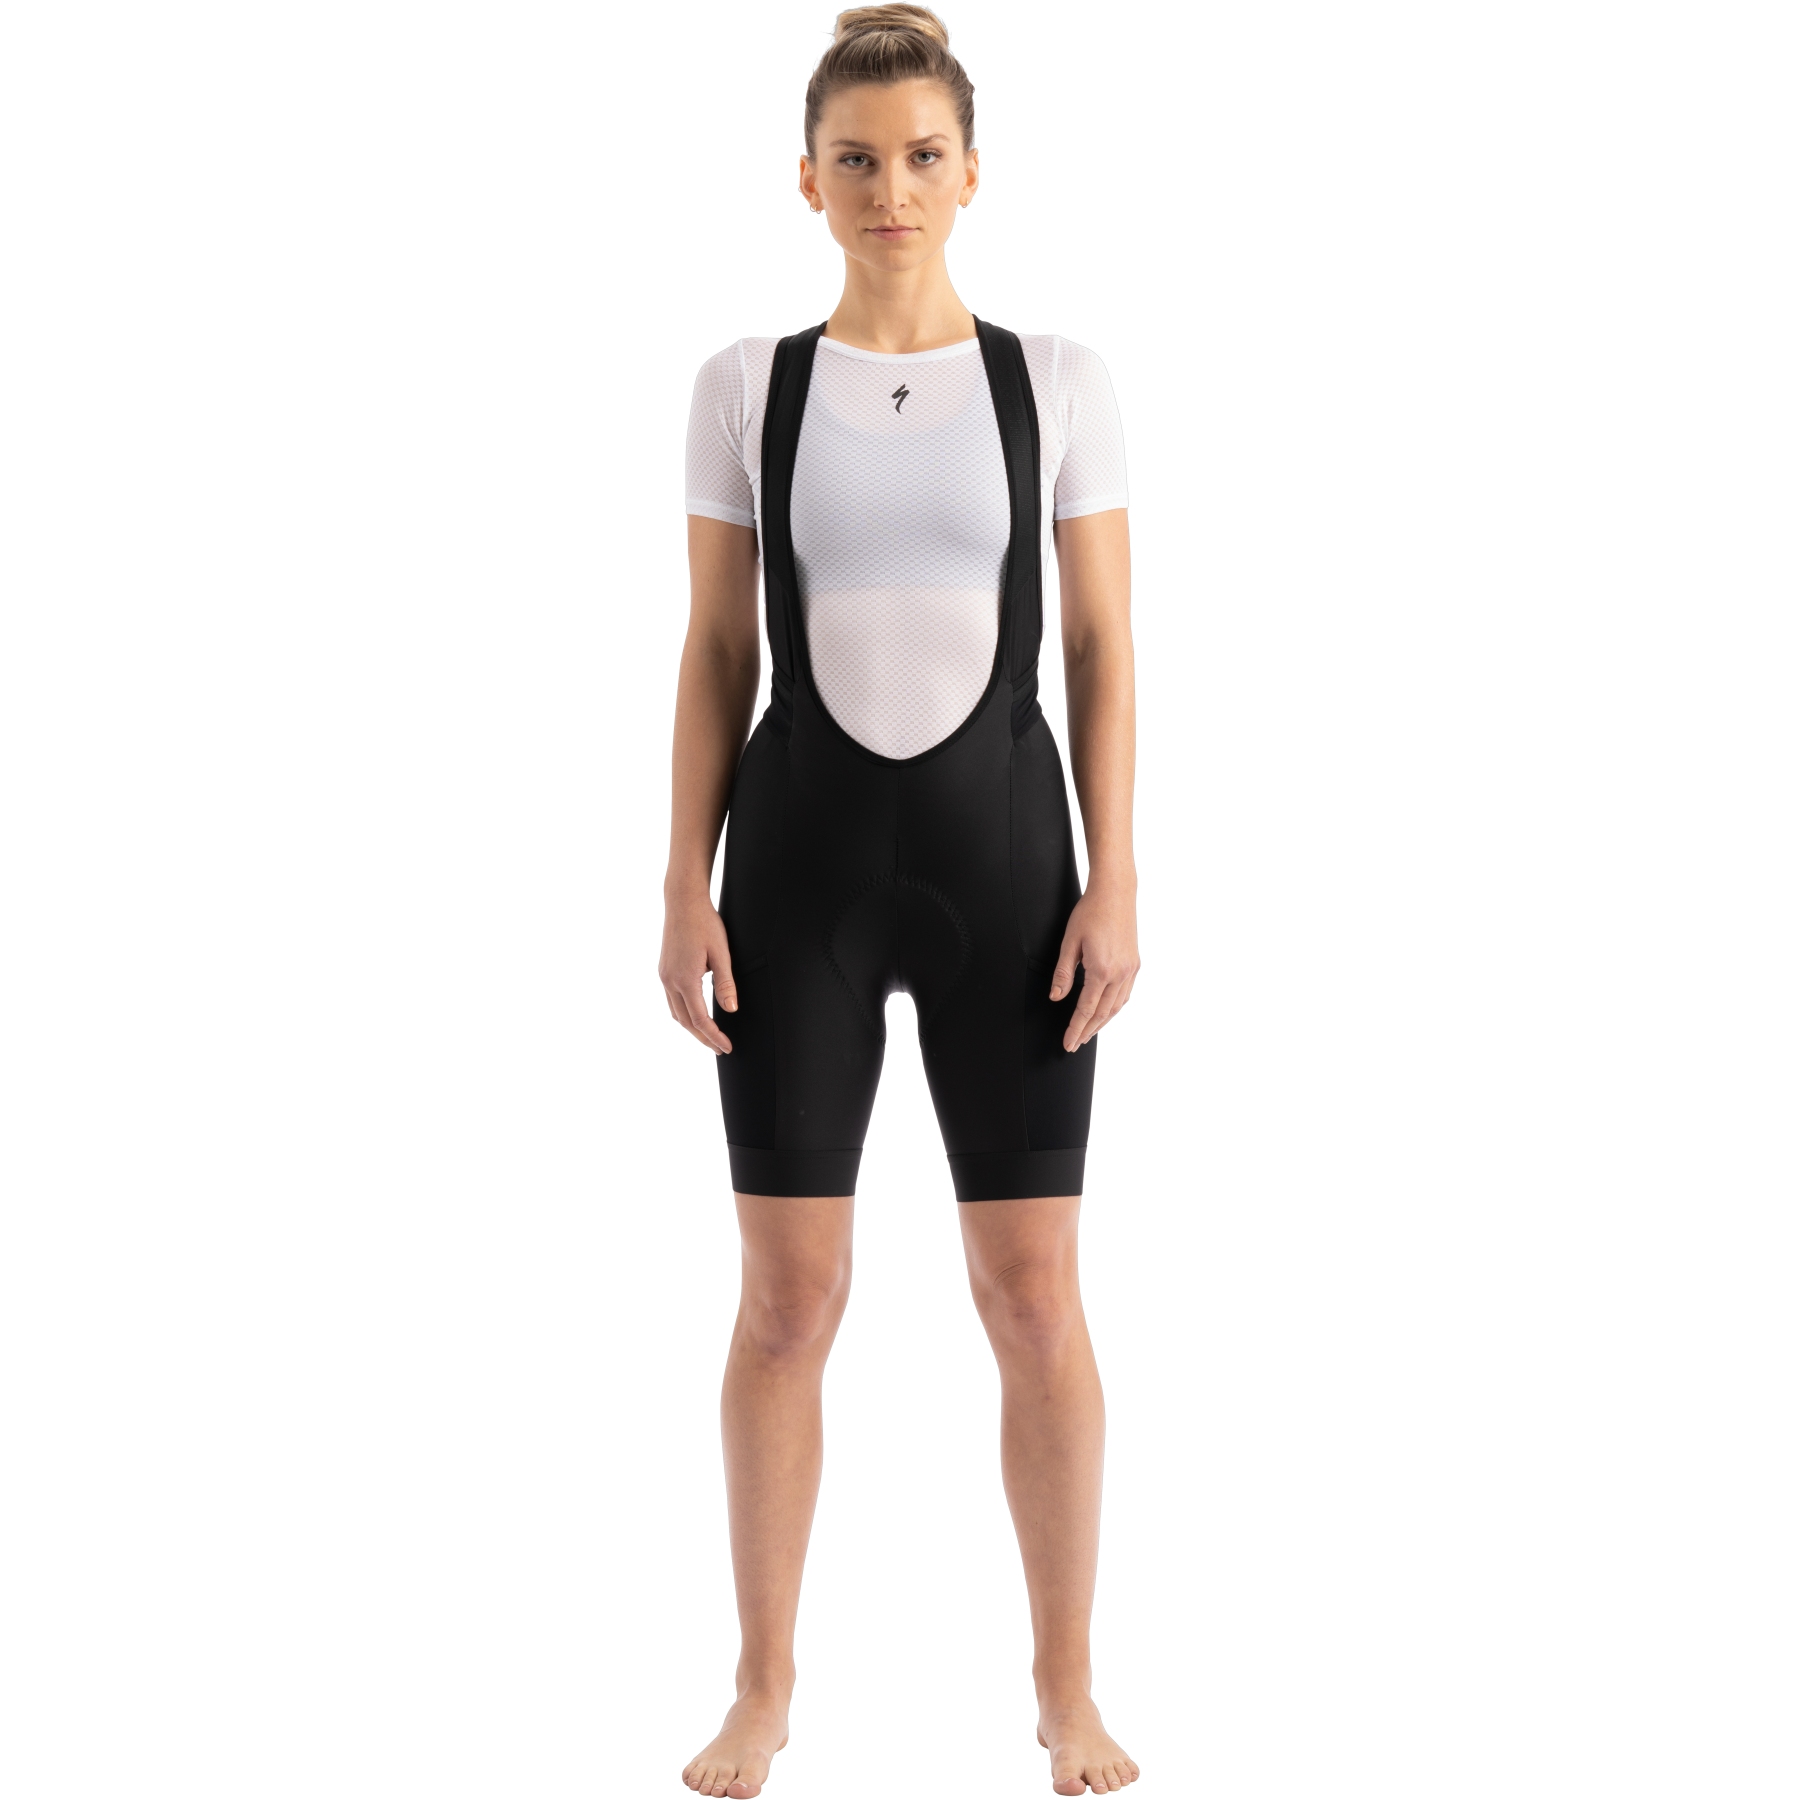 Picture of Specialized ADV Swat Bib Shorts Women - black